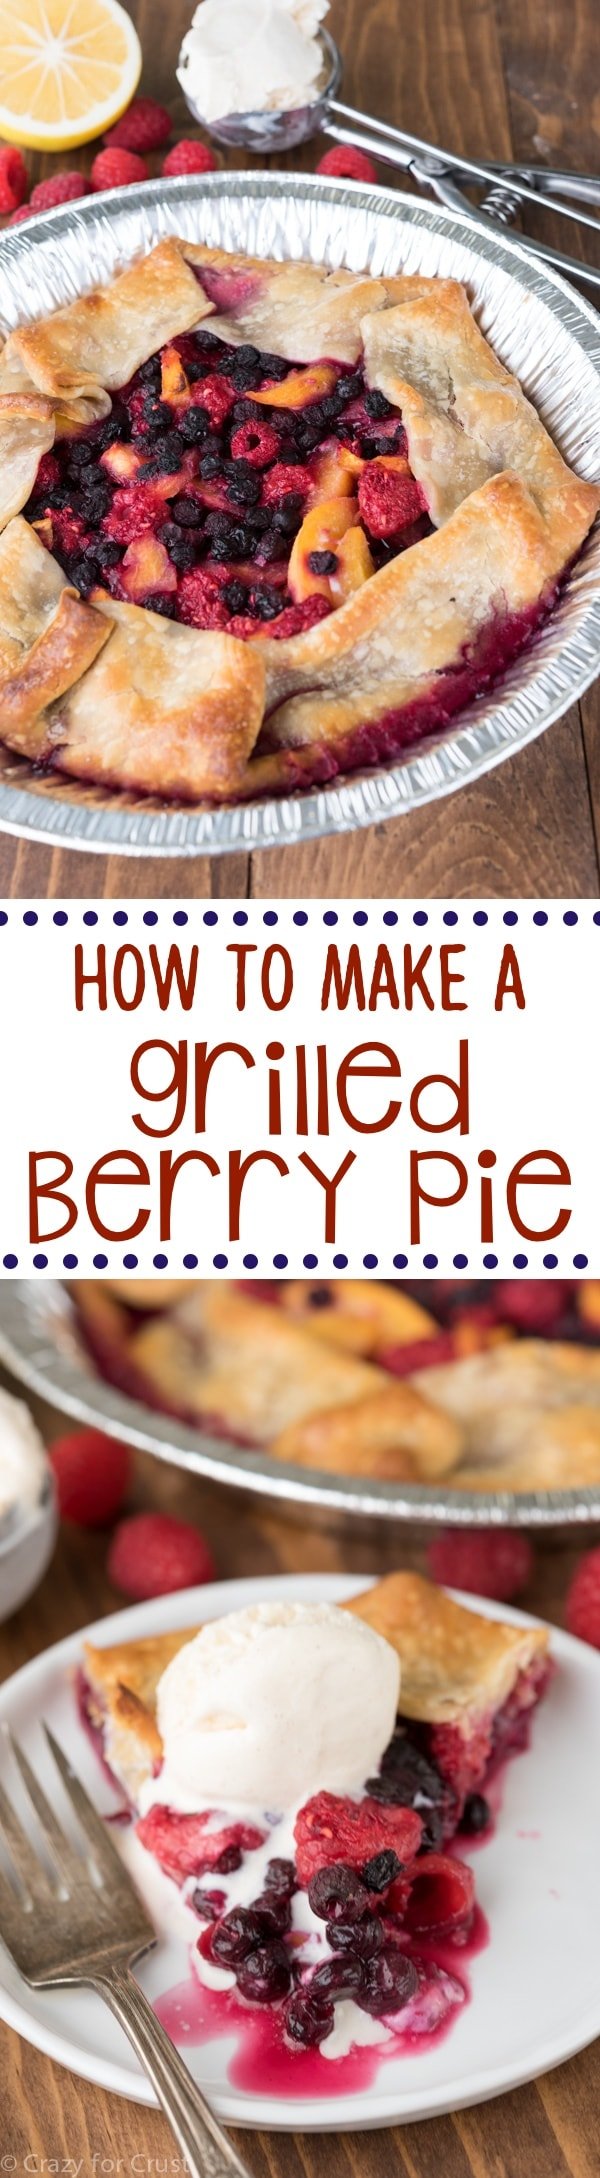 Learn how to grill a pie! This Grilled Berry Peach Pie Recipe is so easy and is made on the BBQ! No oven needed so it's the perfect dessert for summer.